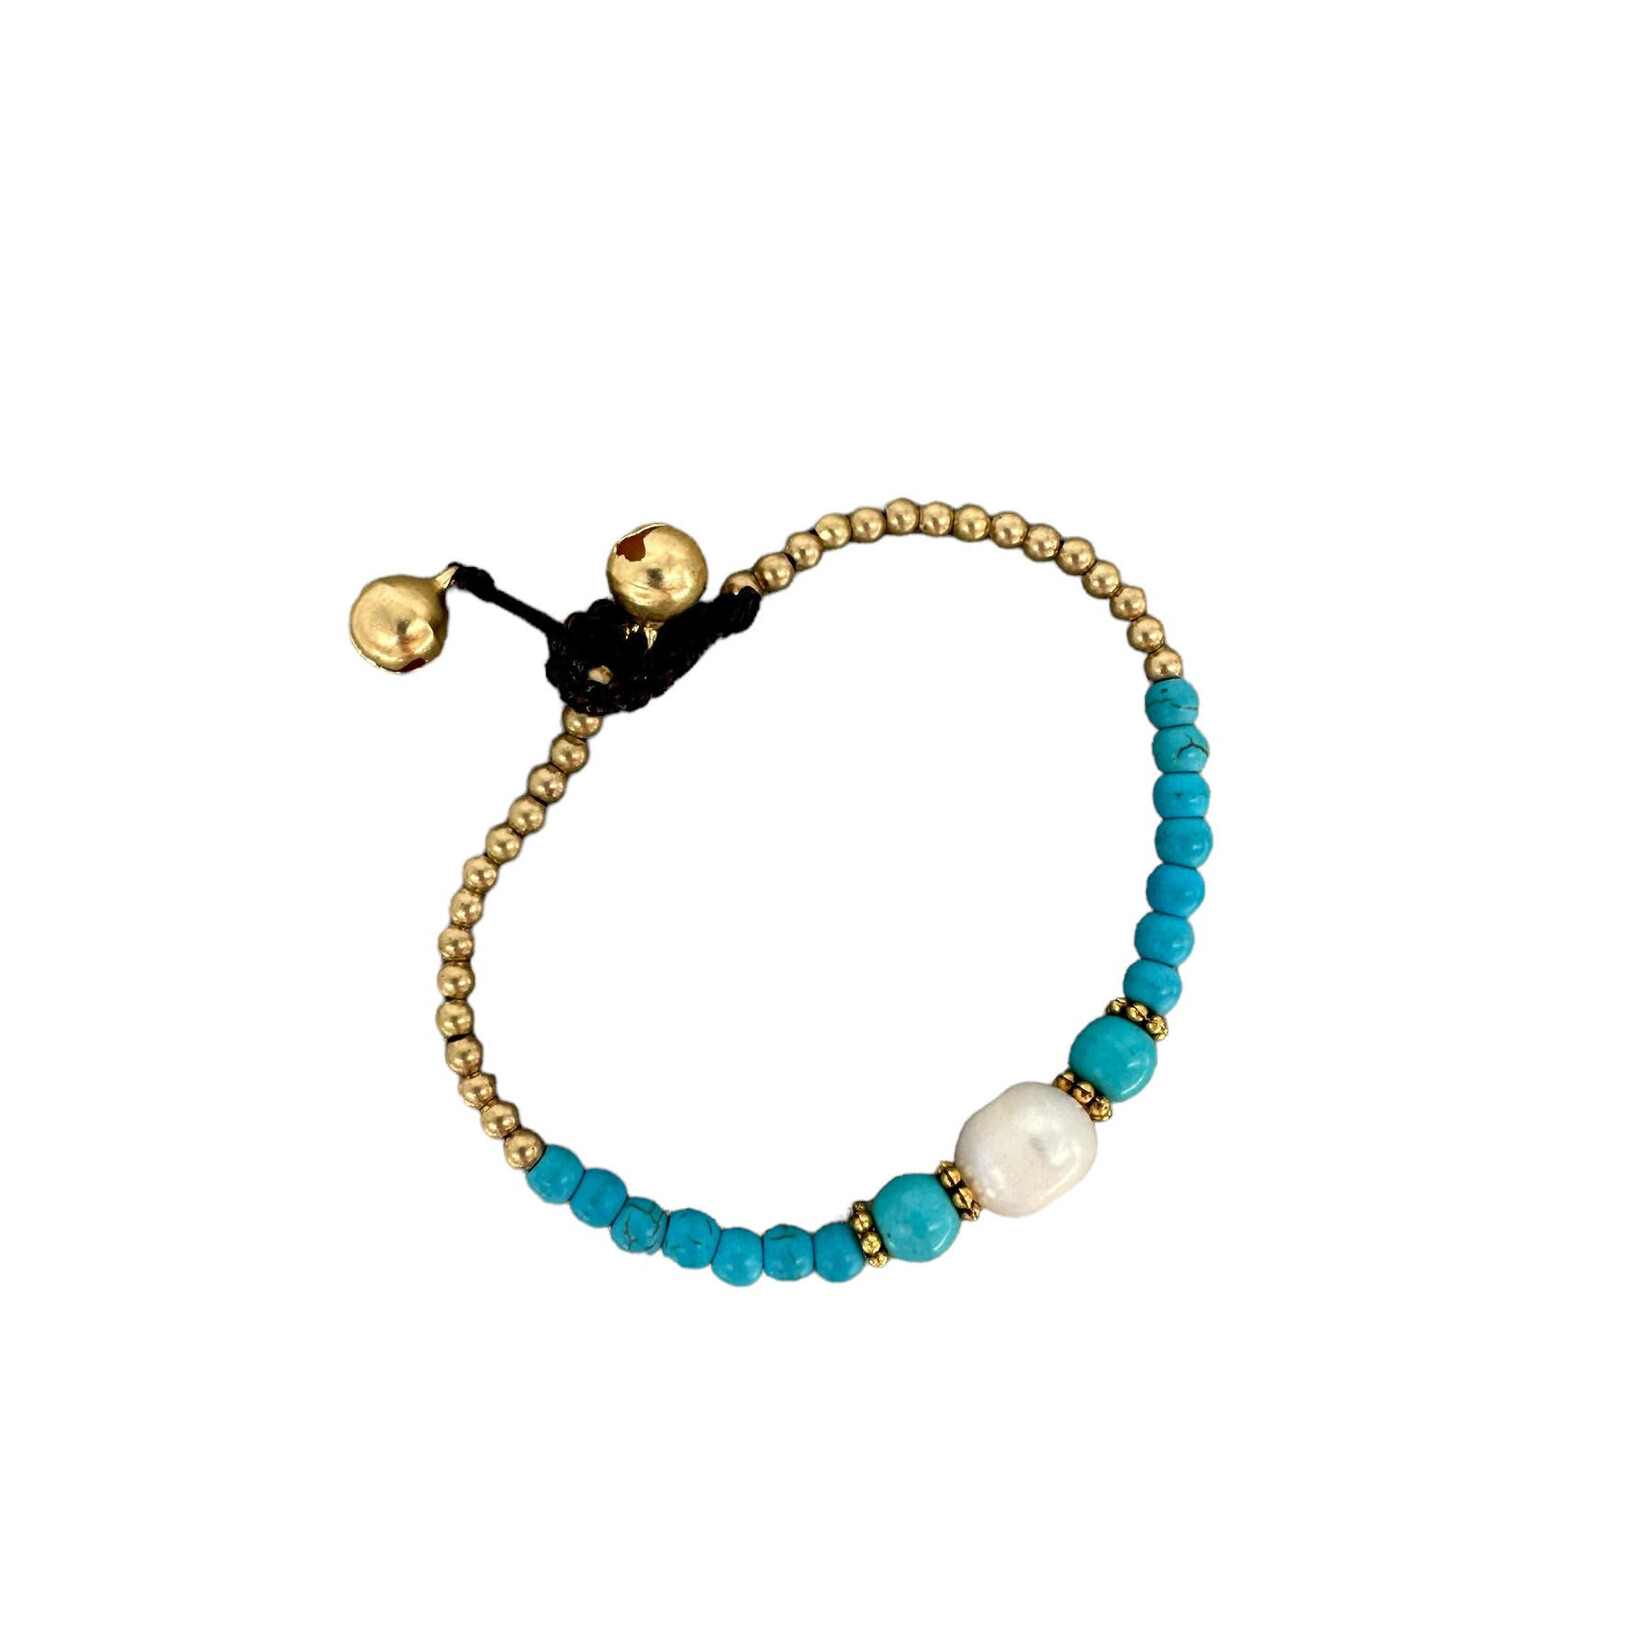 Pearl, Turquoise Gemstone and Brass Bead Bracelet BB10